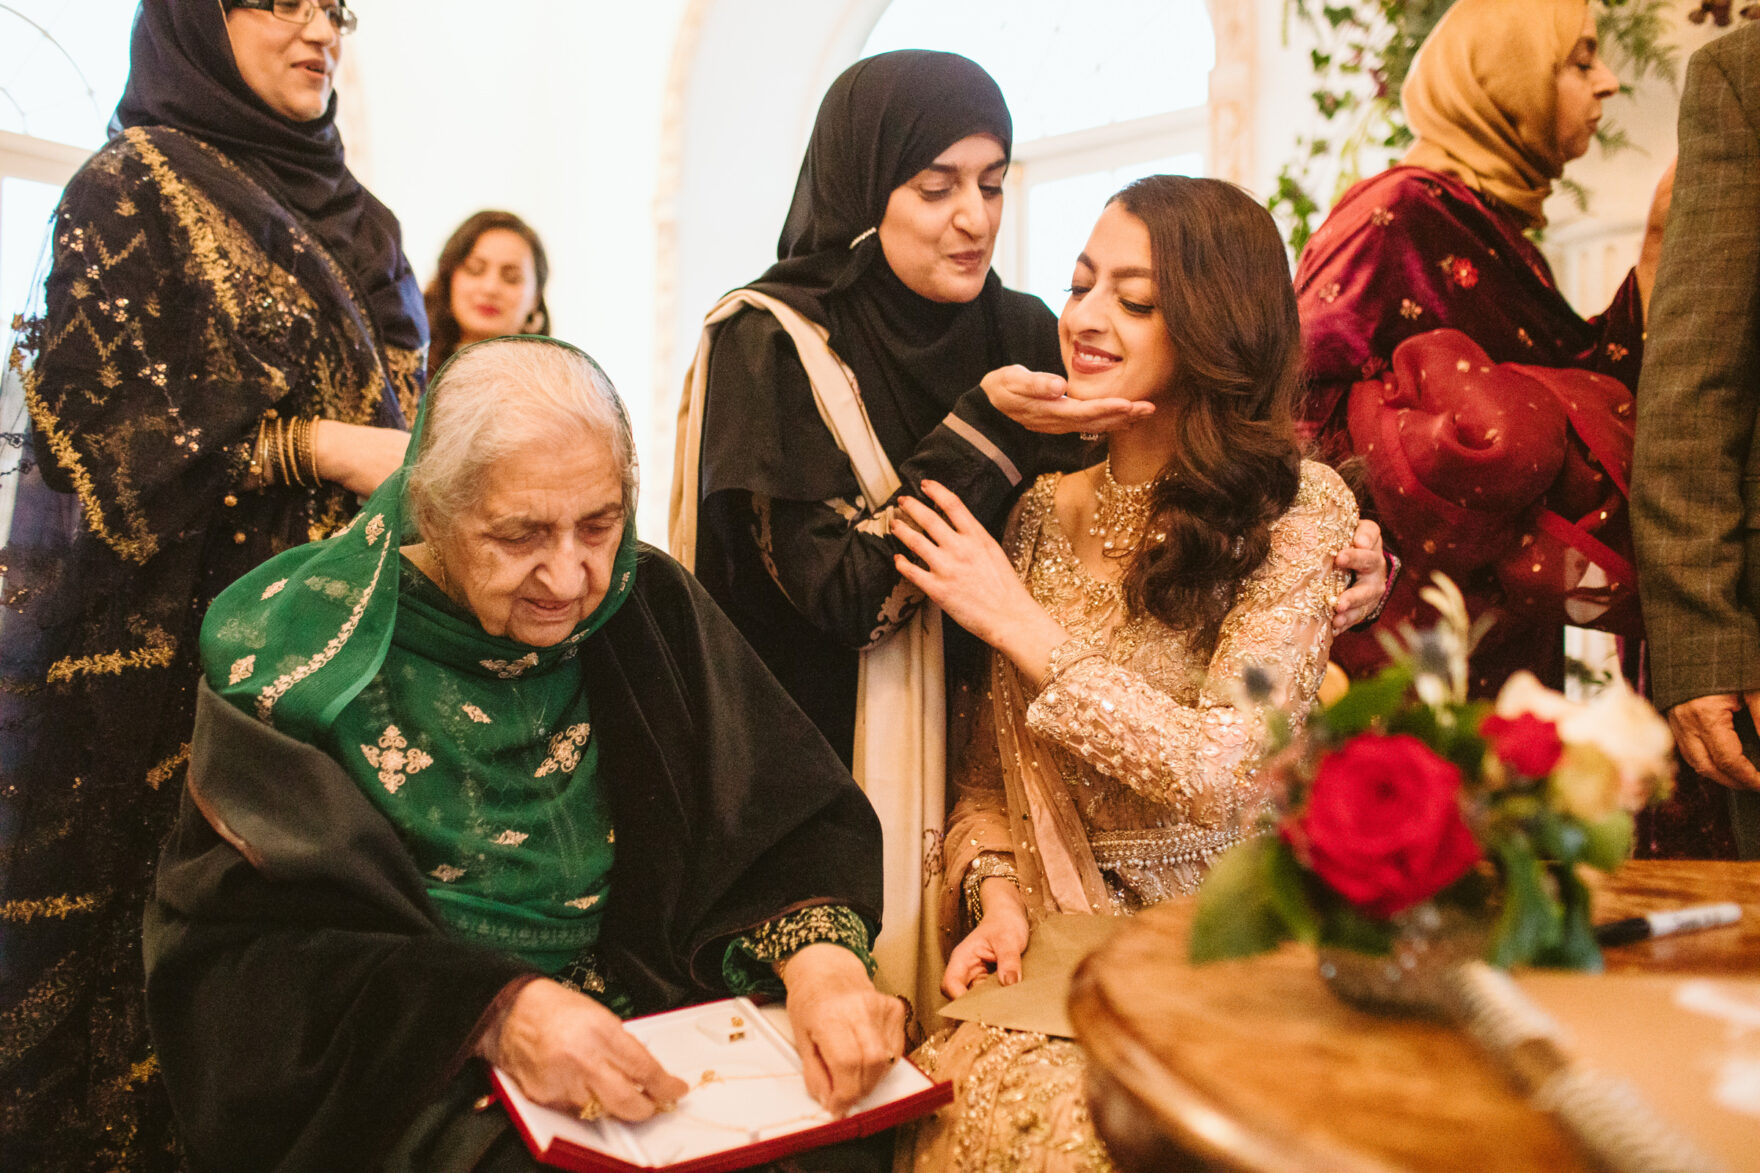 Islamic Bride at a London Nikkah Wedding with her guests